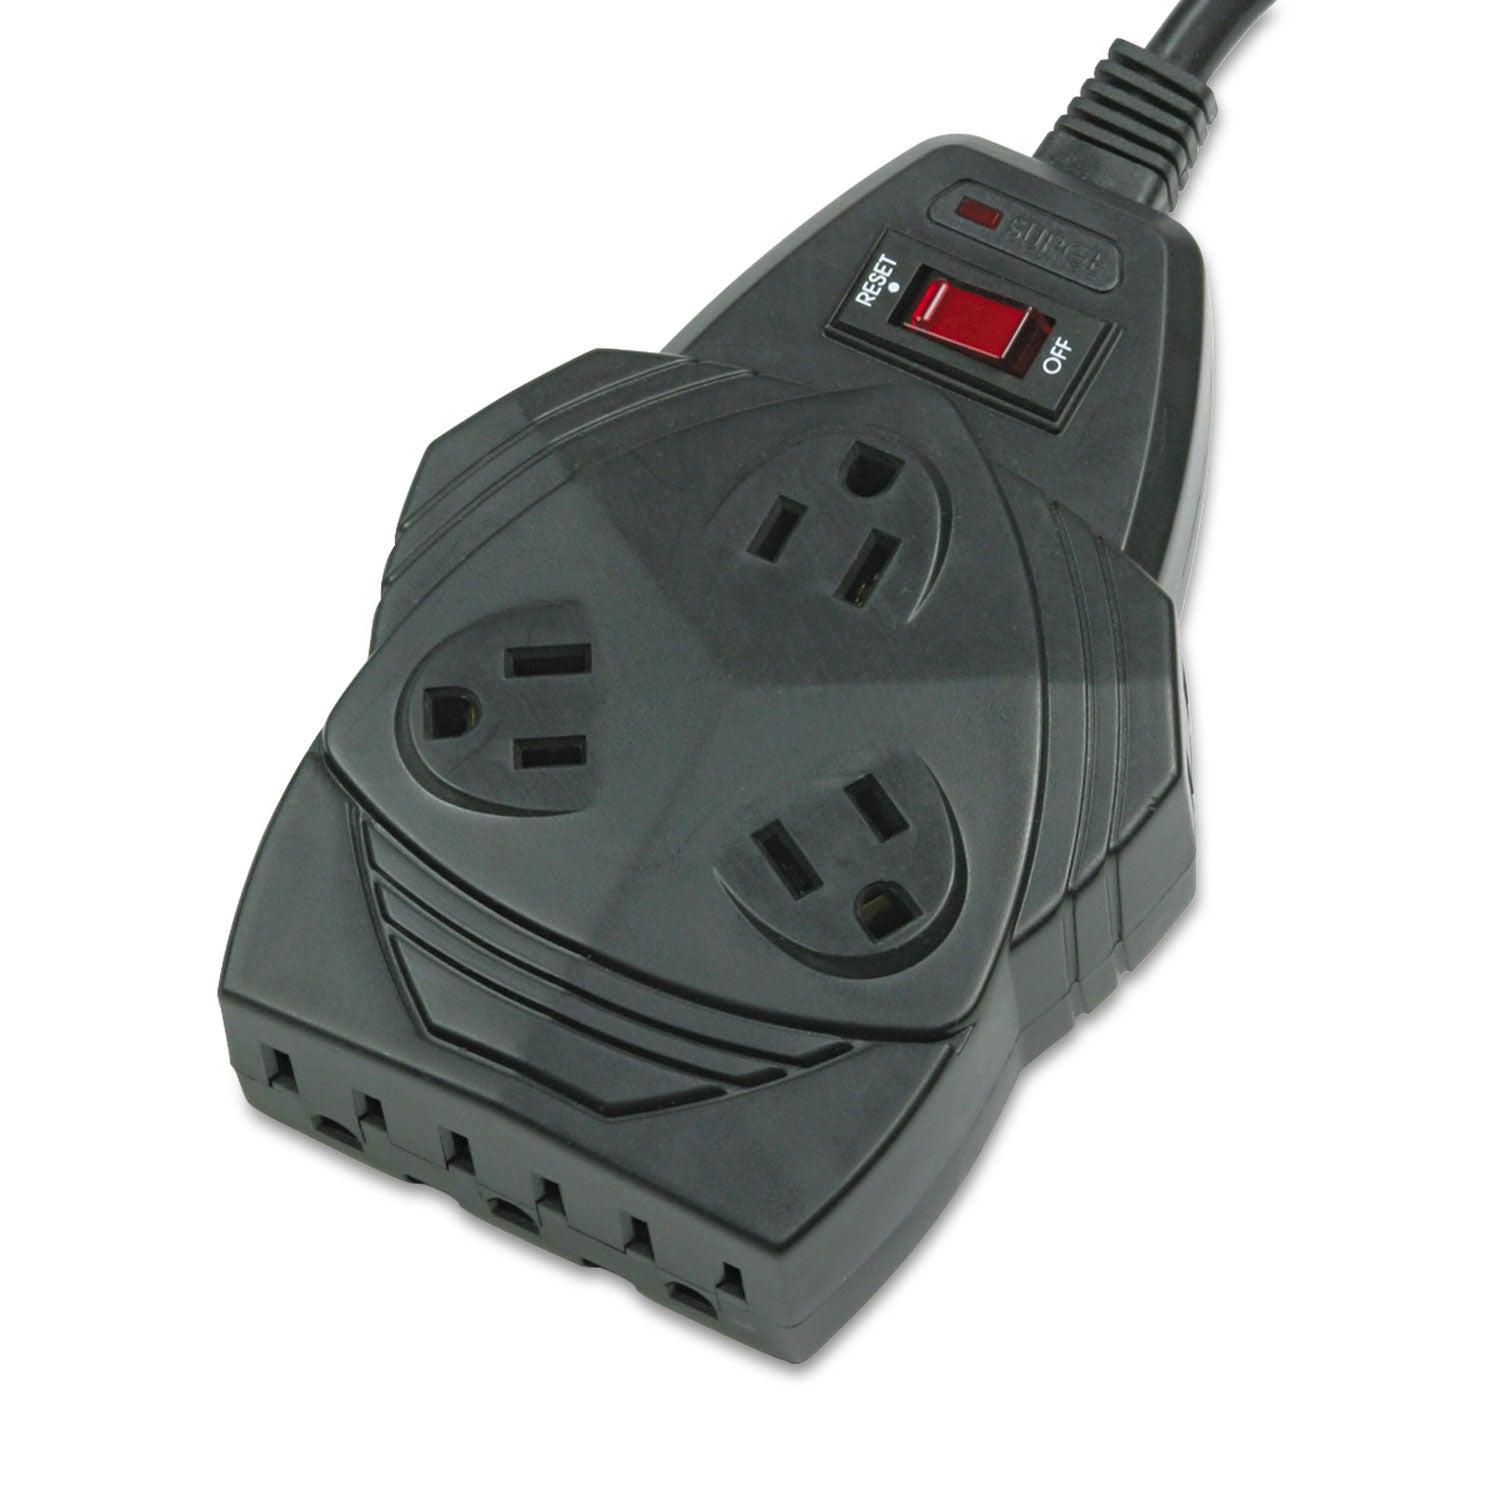 Mighty 8 Surge Protector, 8 AC Outlets, 6 ft Cord, 1,300 J, Black - 